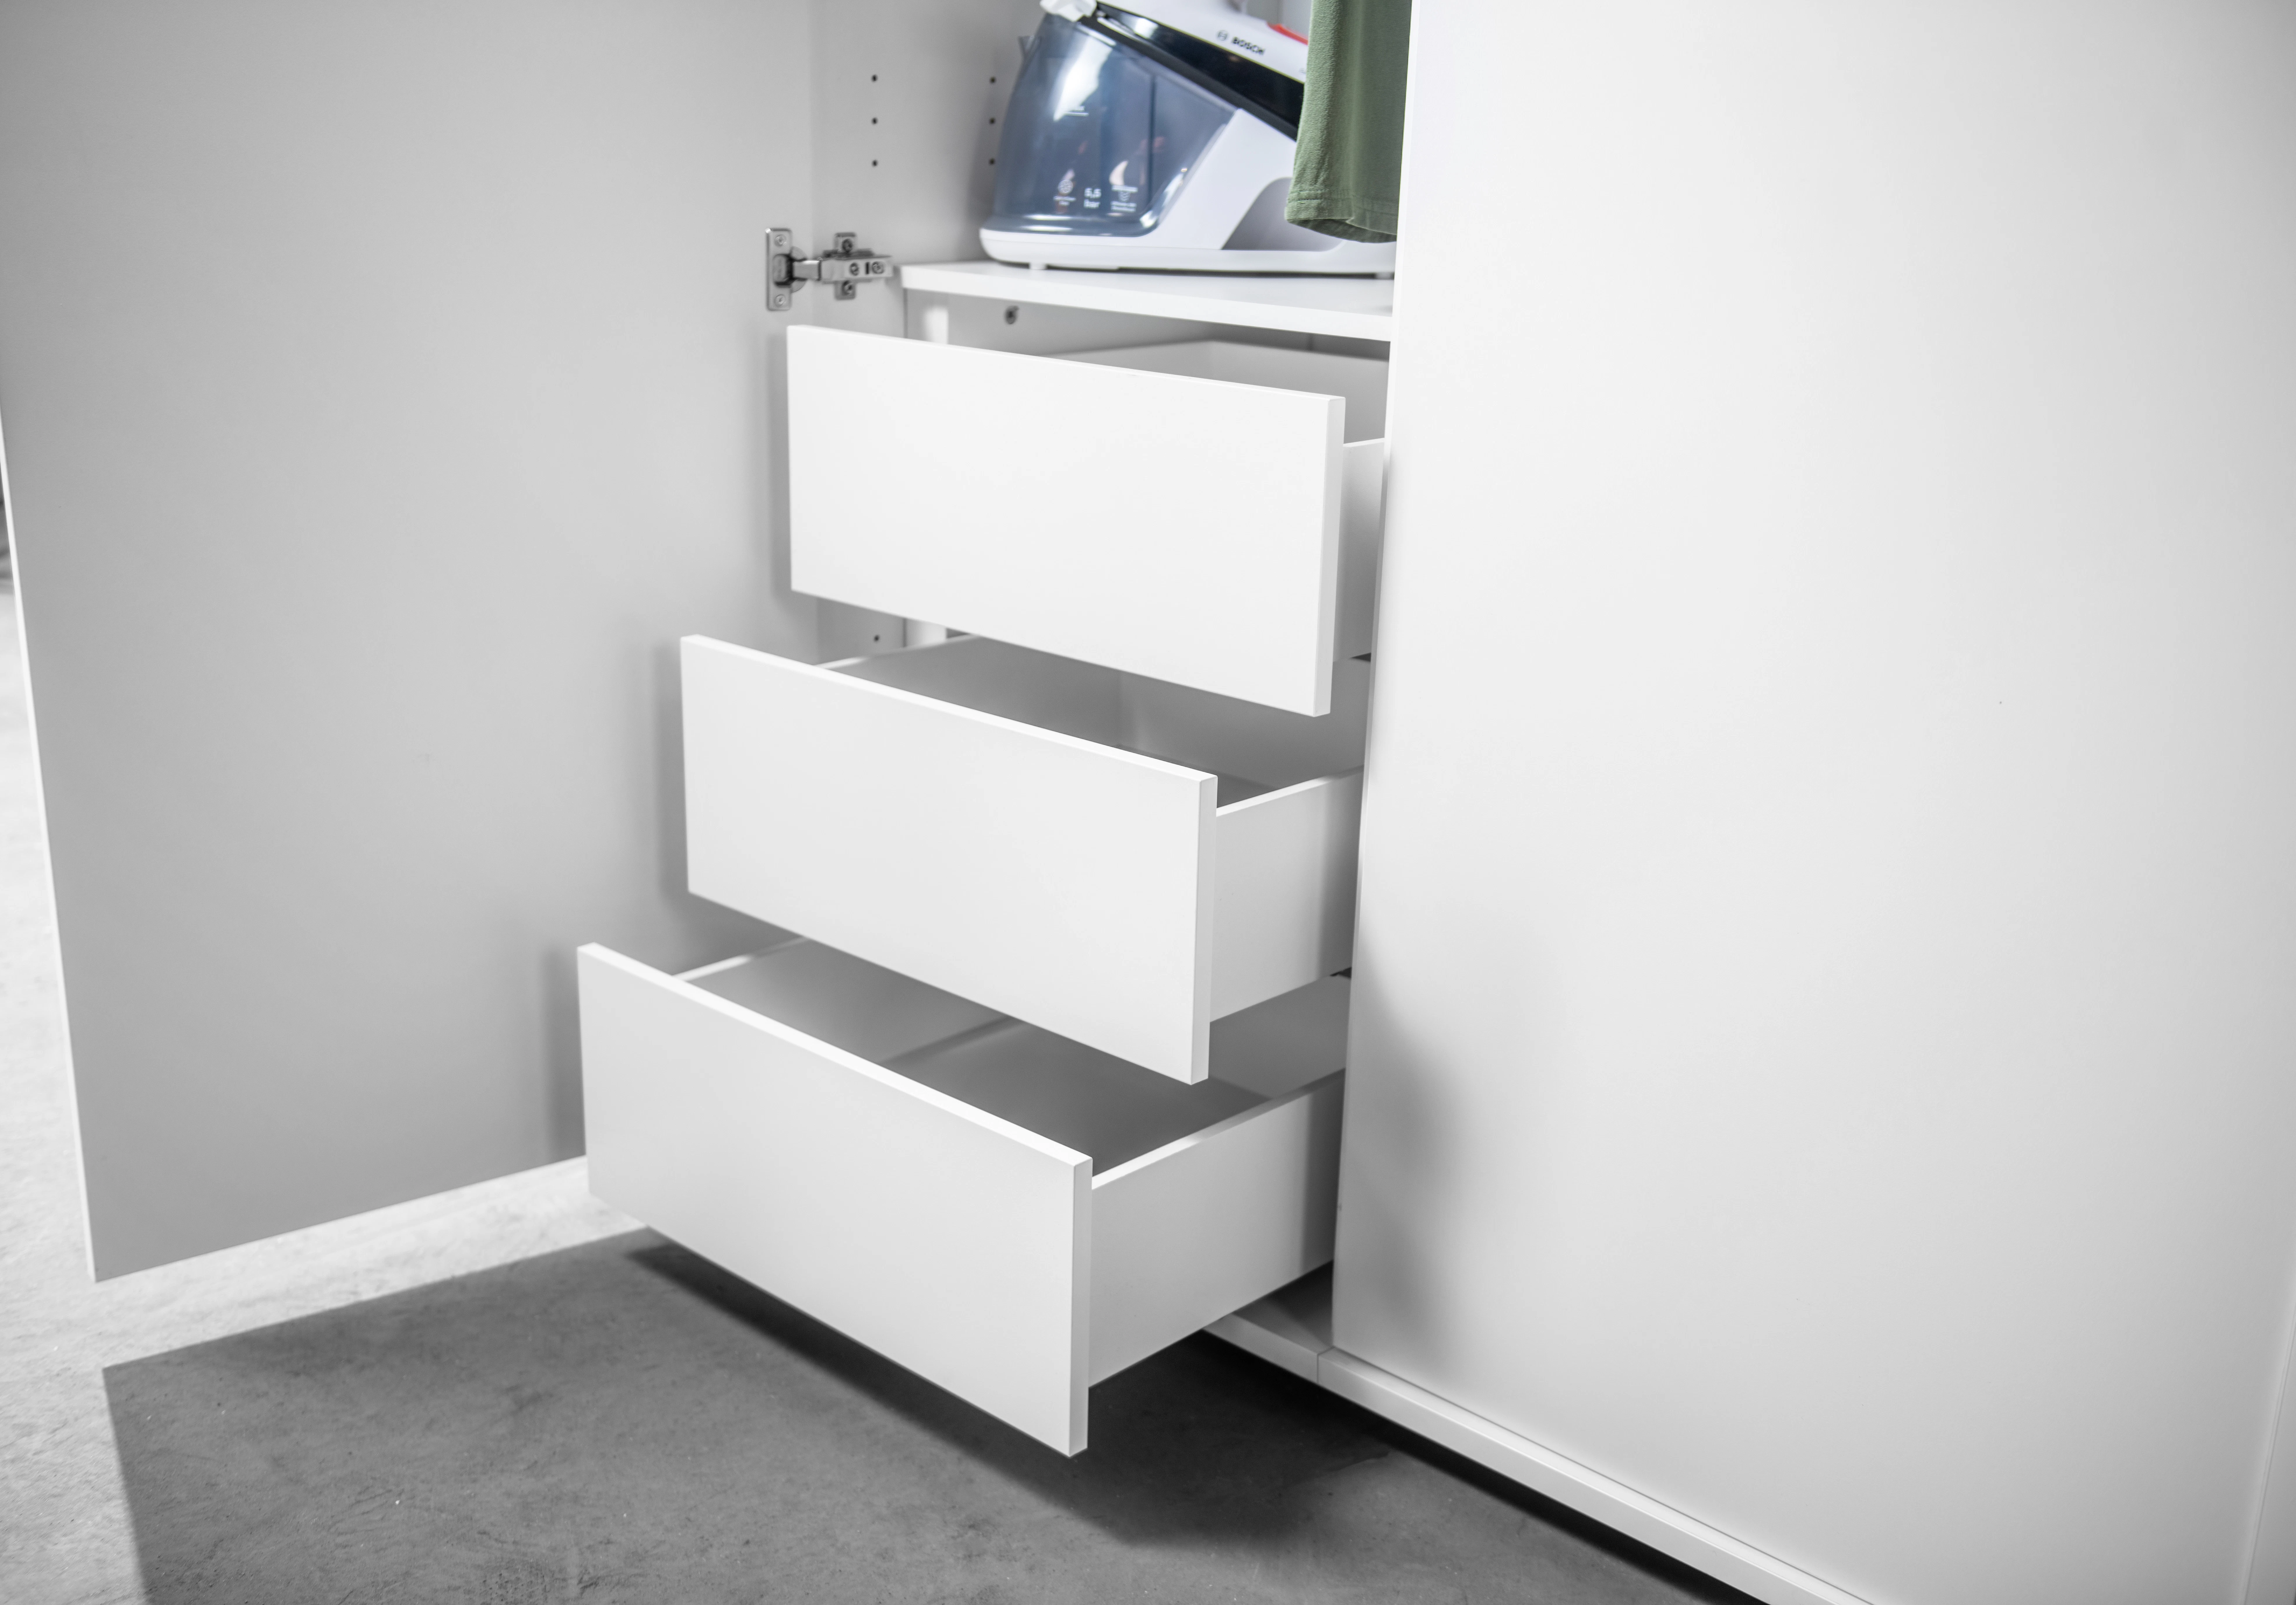 Lifestyle picture of drawer unit with open drawers